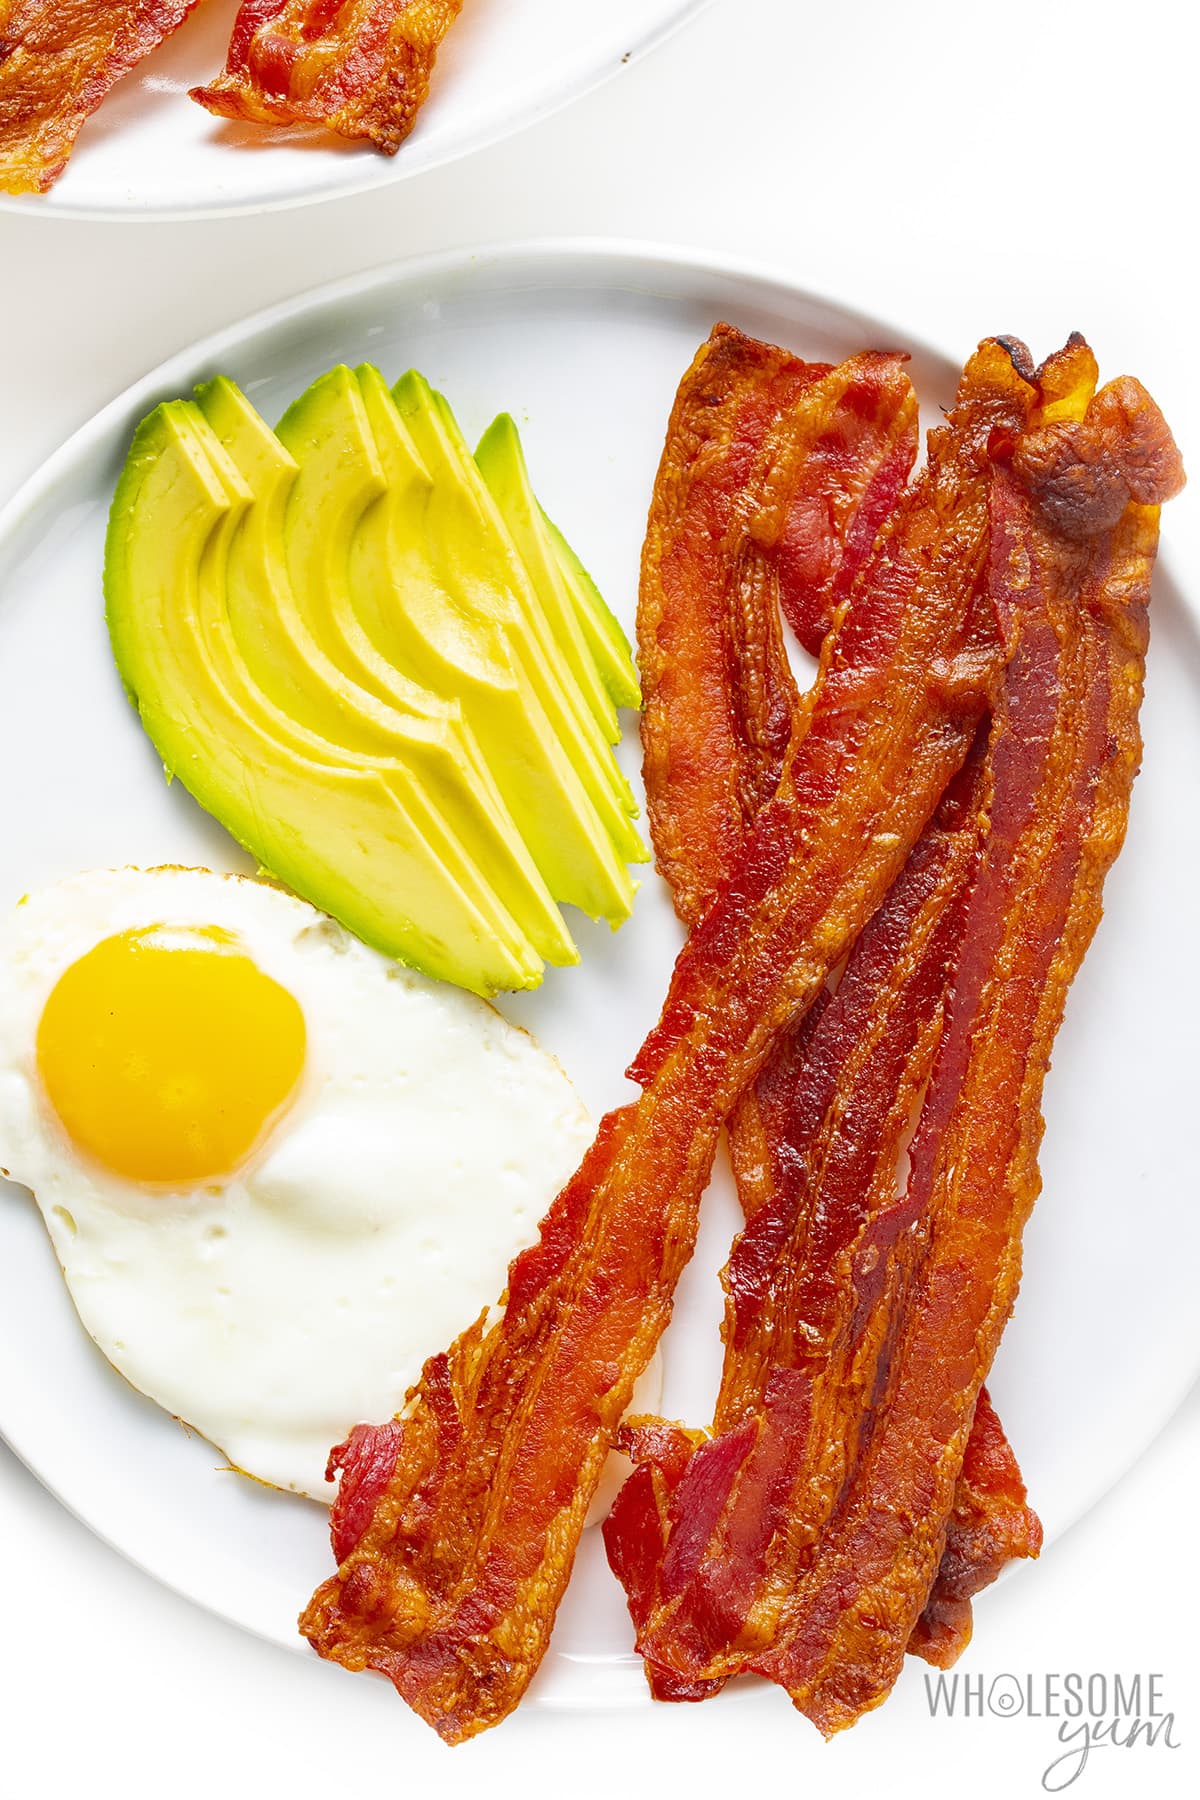 Breakfast plate: bacon, fried egg, and avocado.